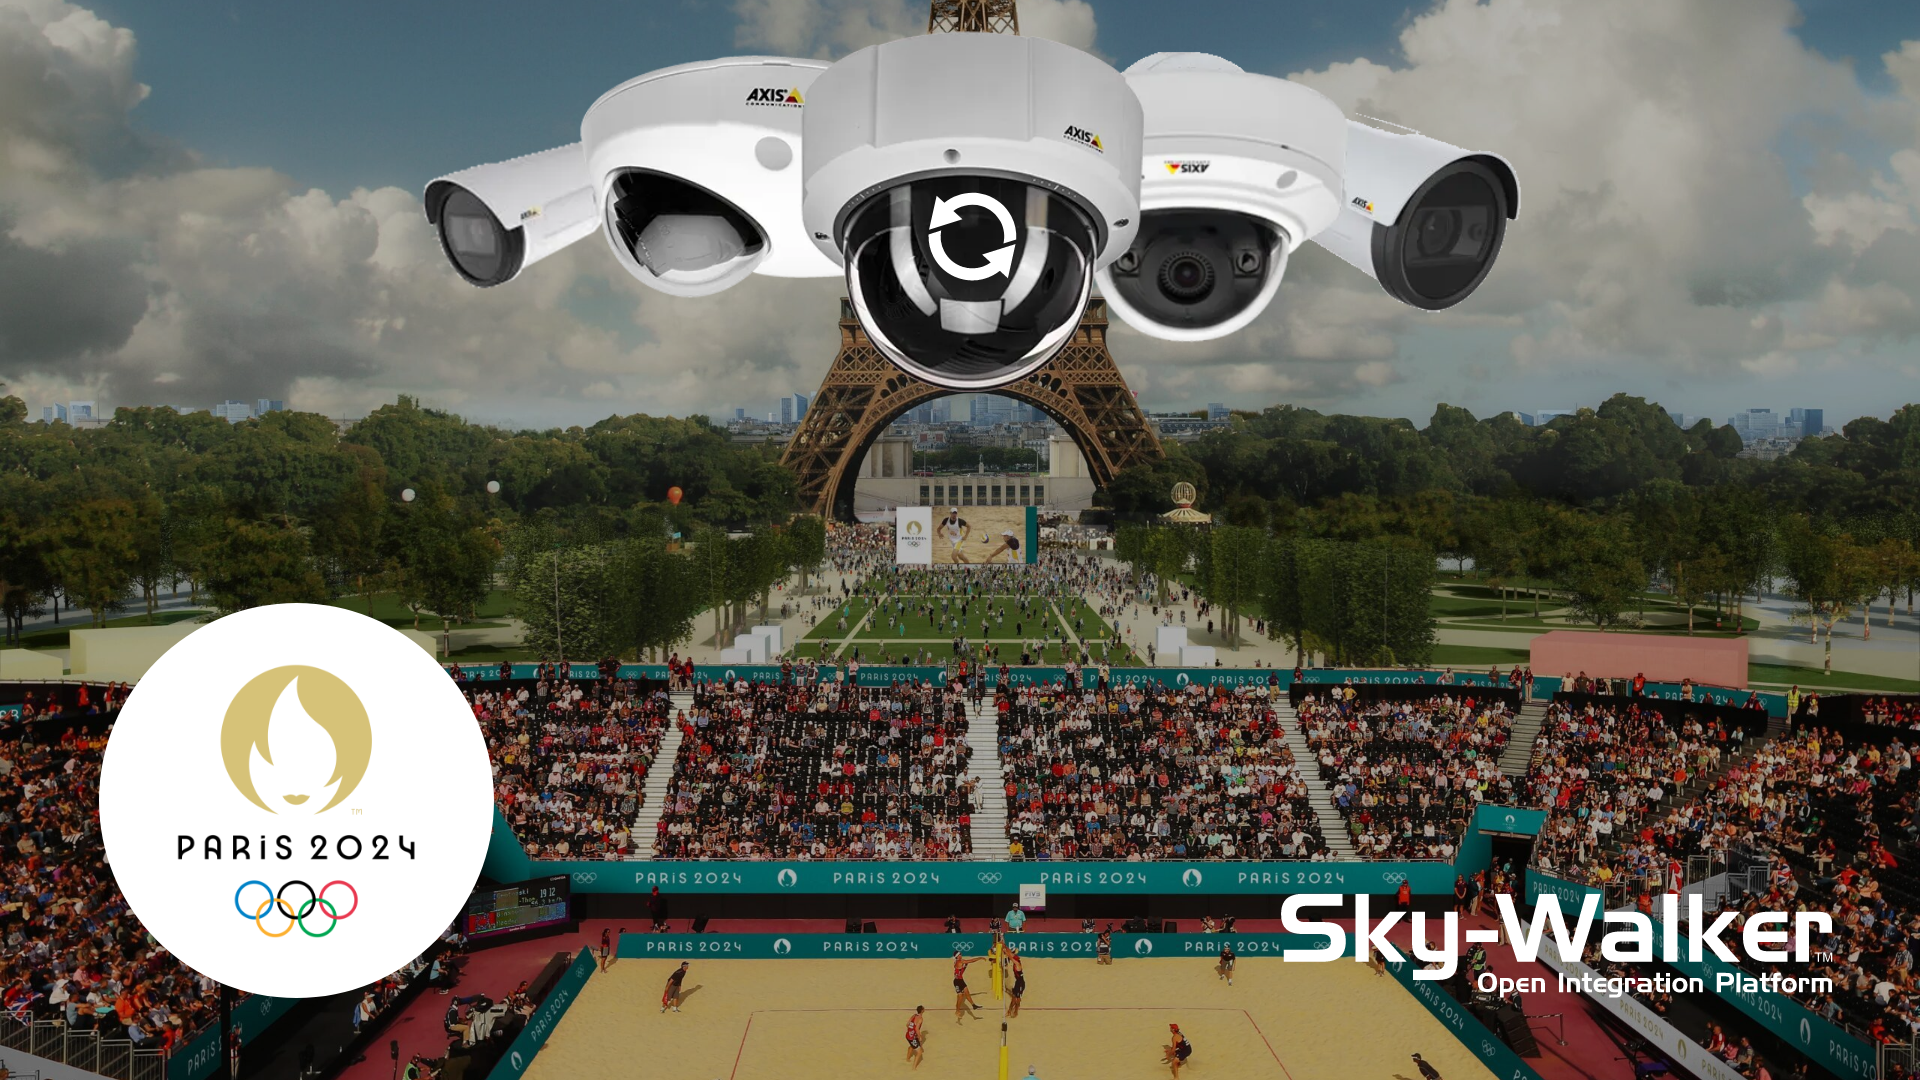 Sky-Walker: Ensuring security during the 2024 Olympics in Paris